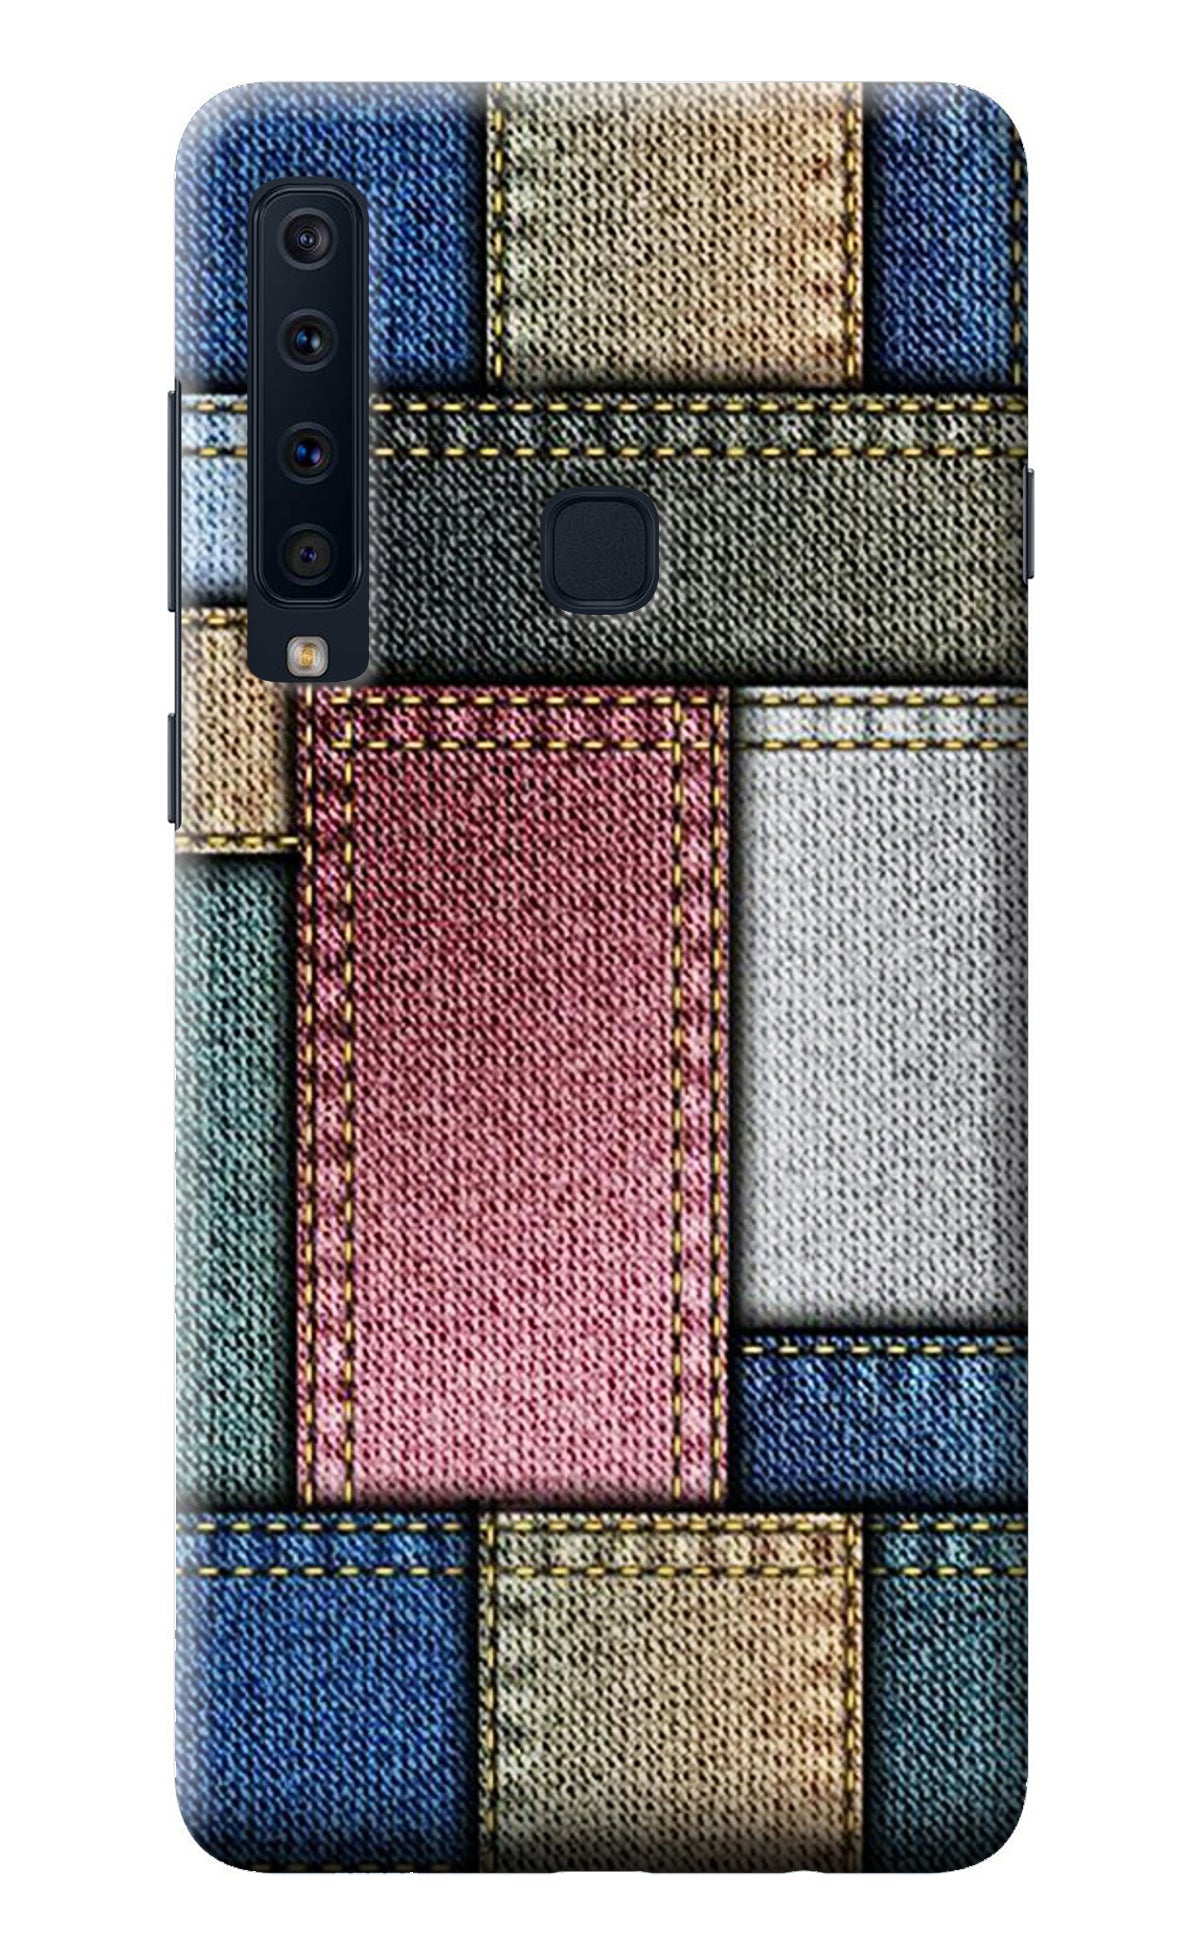 Multicolor Jeans Samsung A9 Back Cover